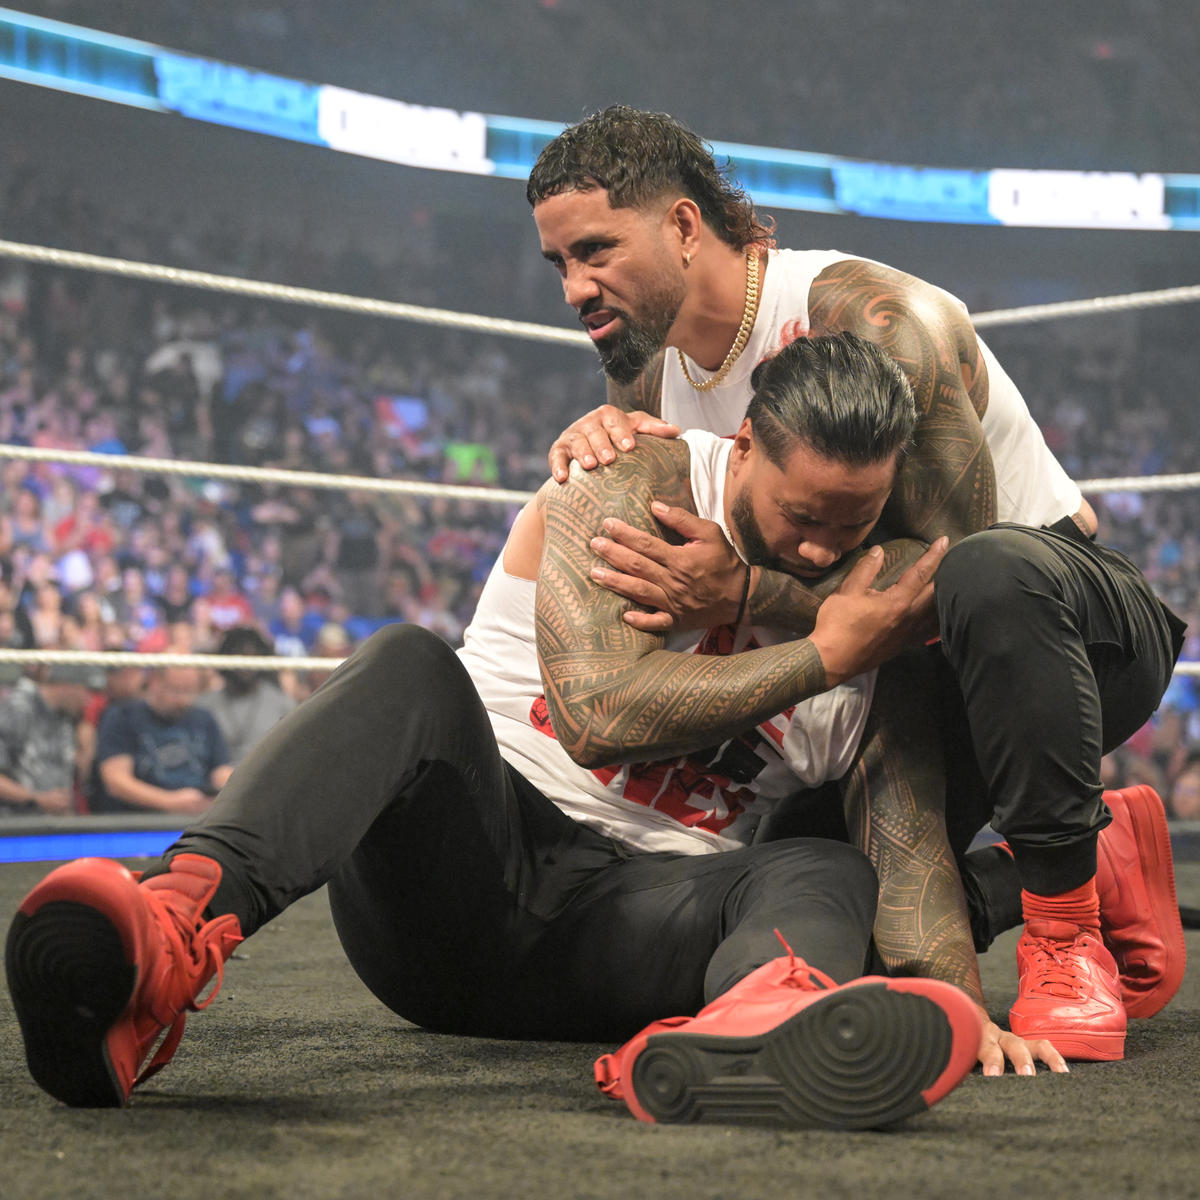 Roman Reigns & Solo Sikoa vs. The Usos.

Money in the Bank.

The Bloodline: Civil War.